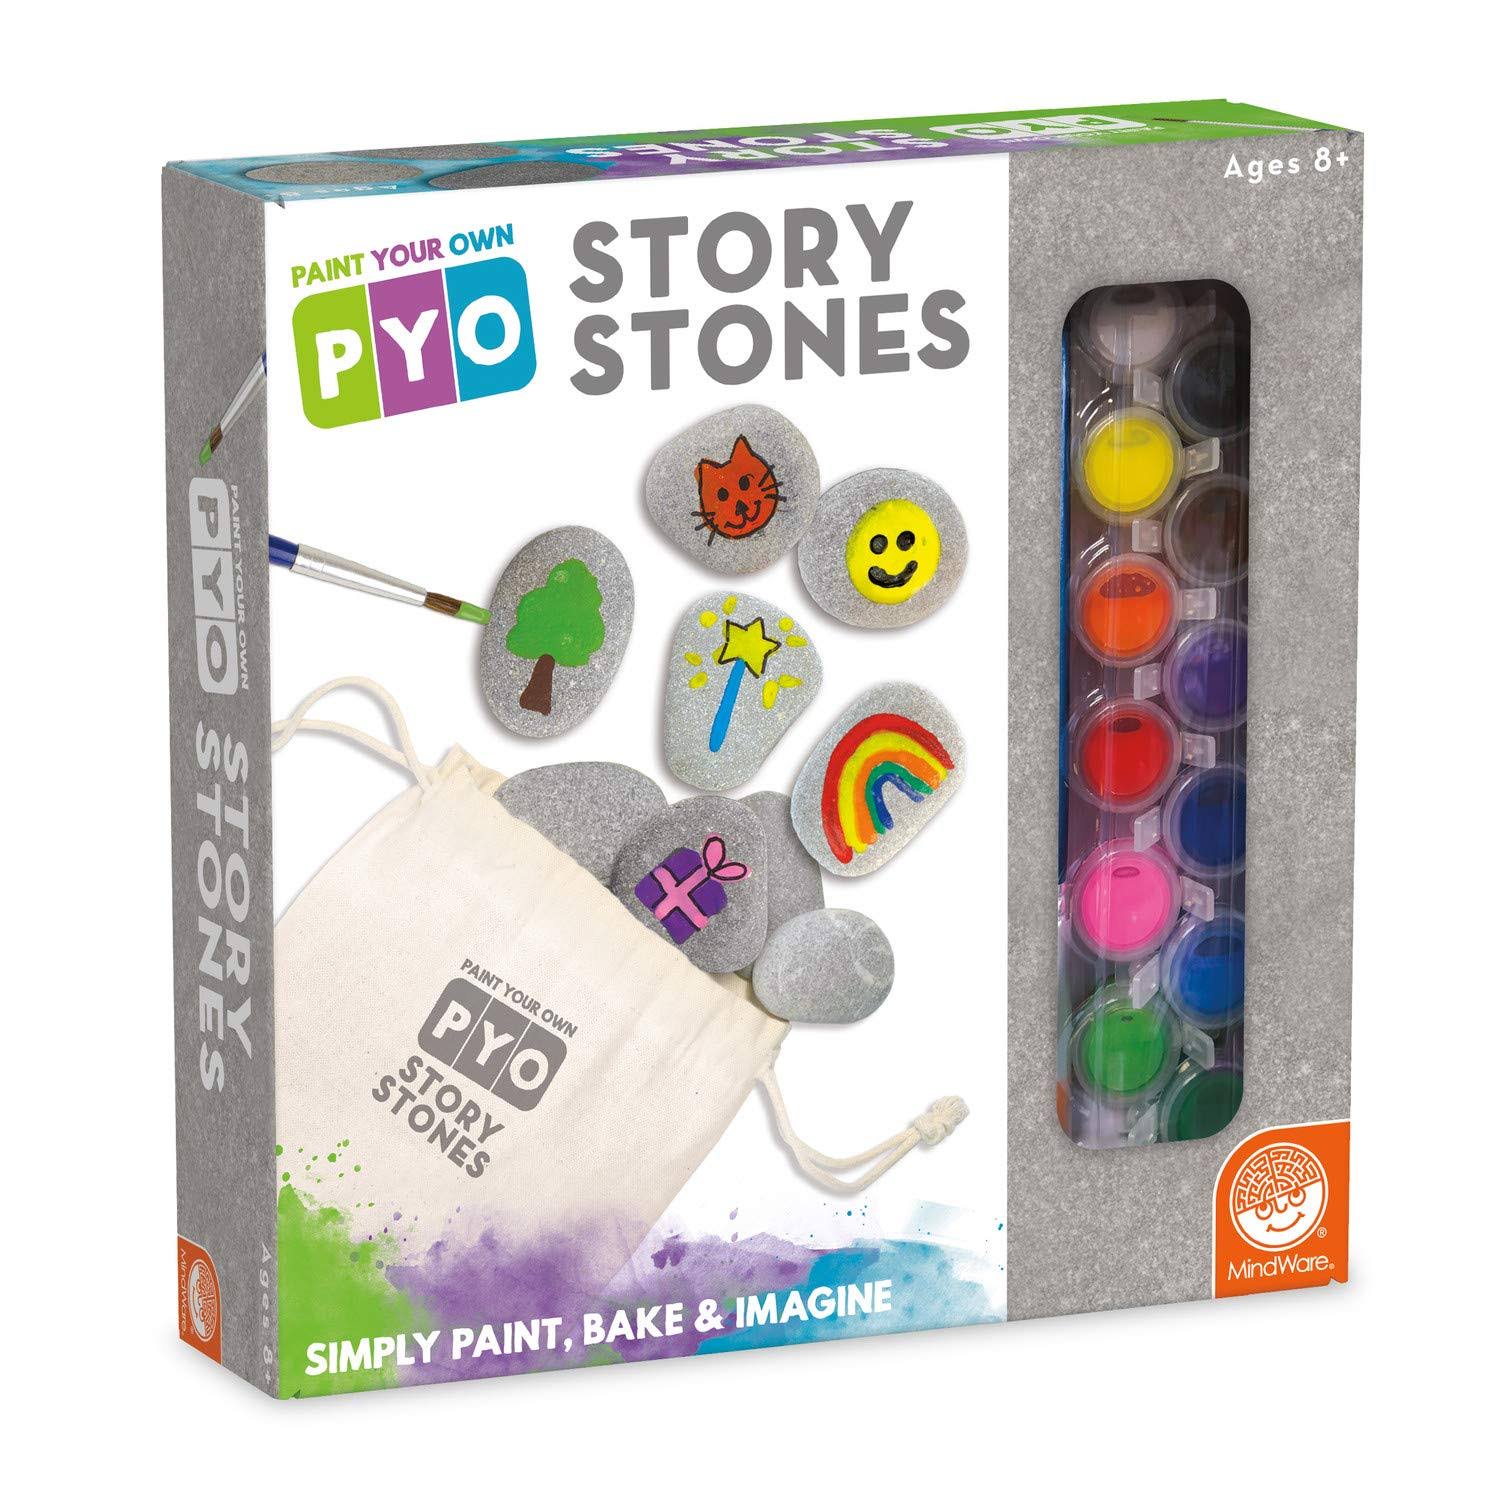 MindWare Paint Your Own Story Stones